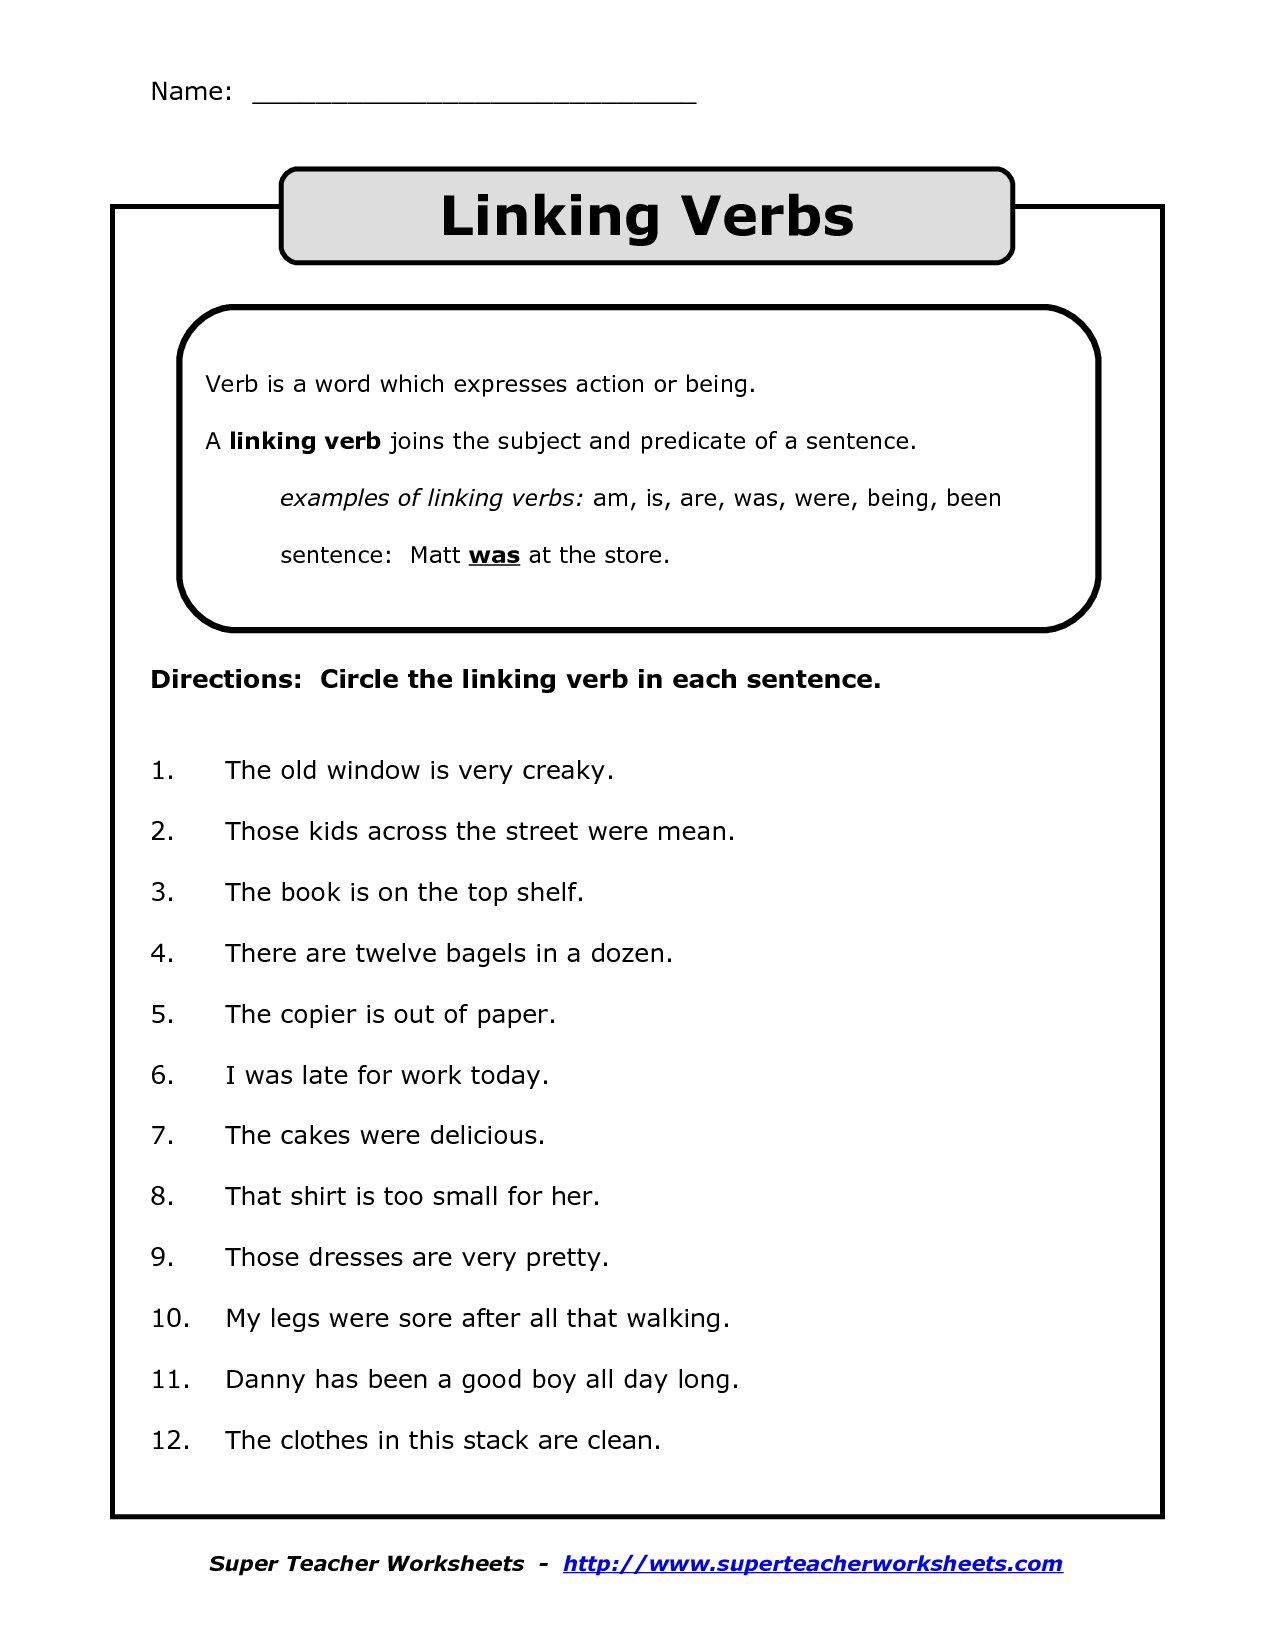 linking-verbs-worksheet-hot-sex-picture